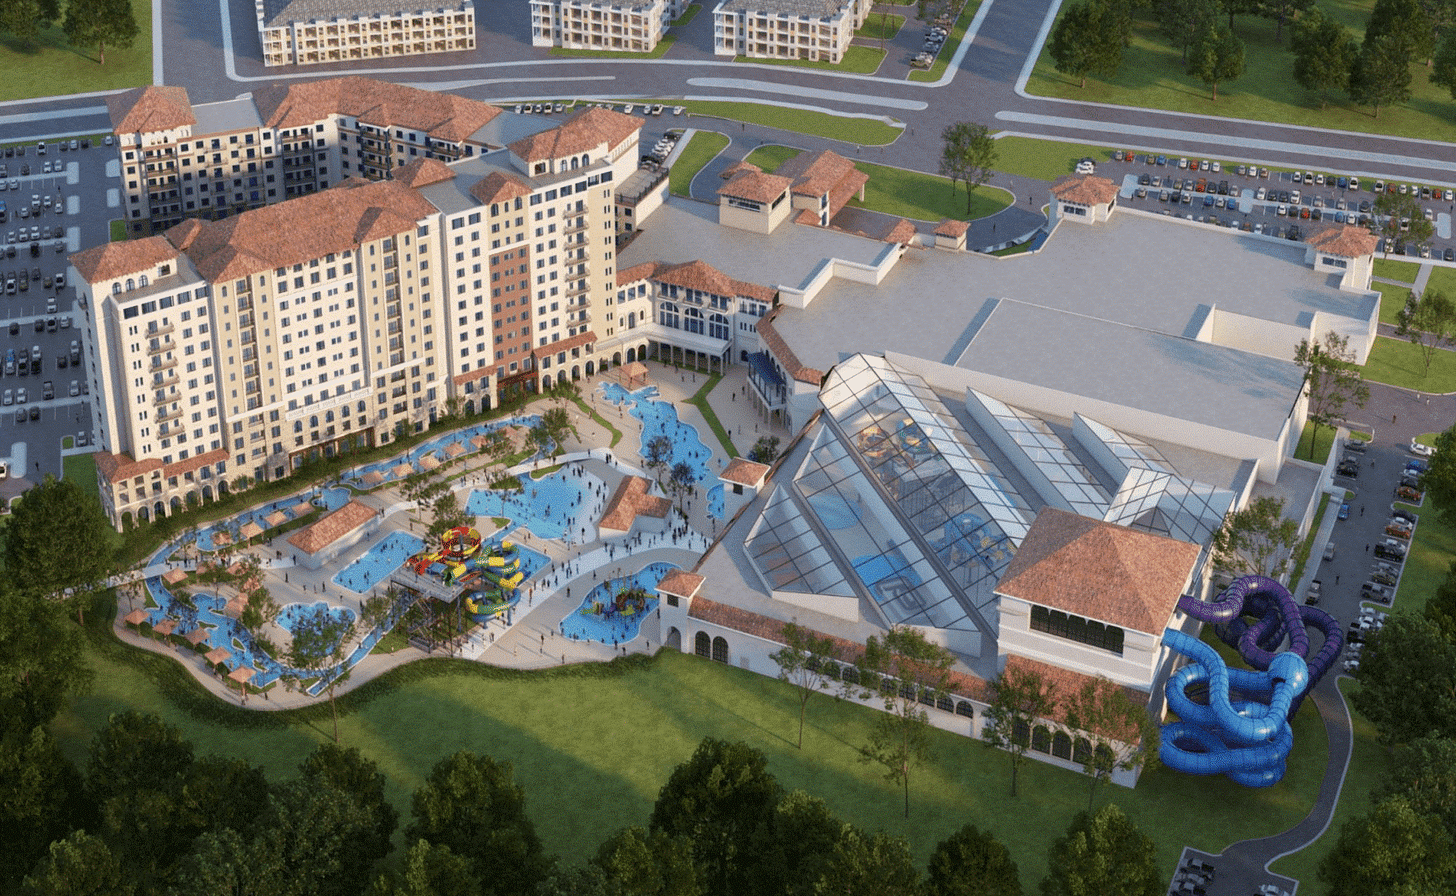 A aerial rendering of an indoor/outdoor waterpark next to a 12-story hotel